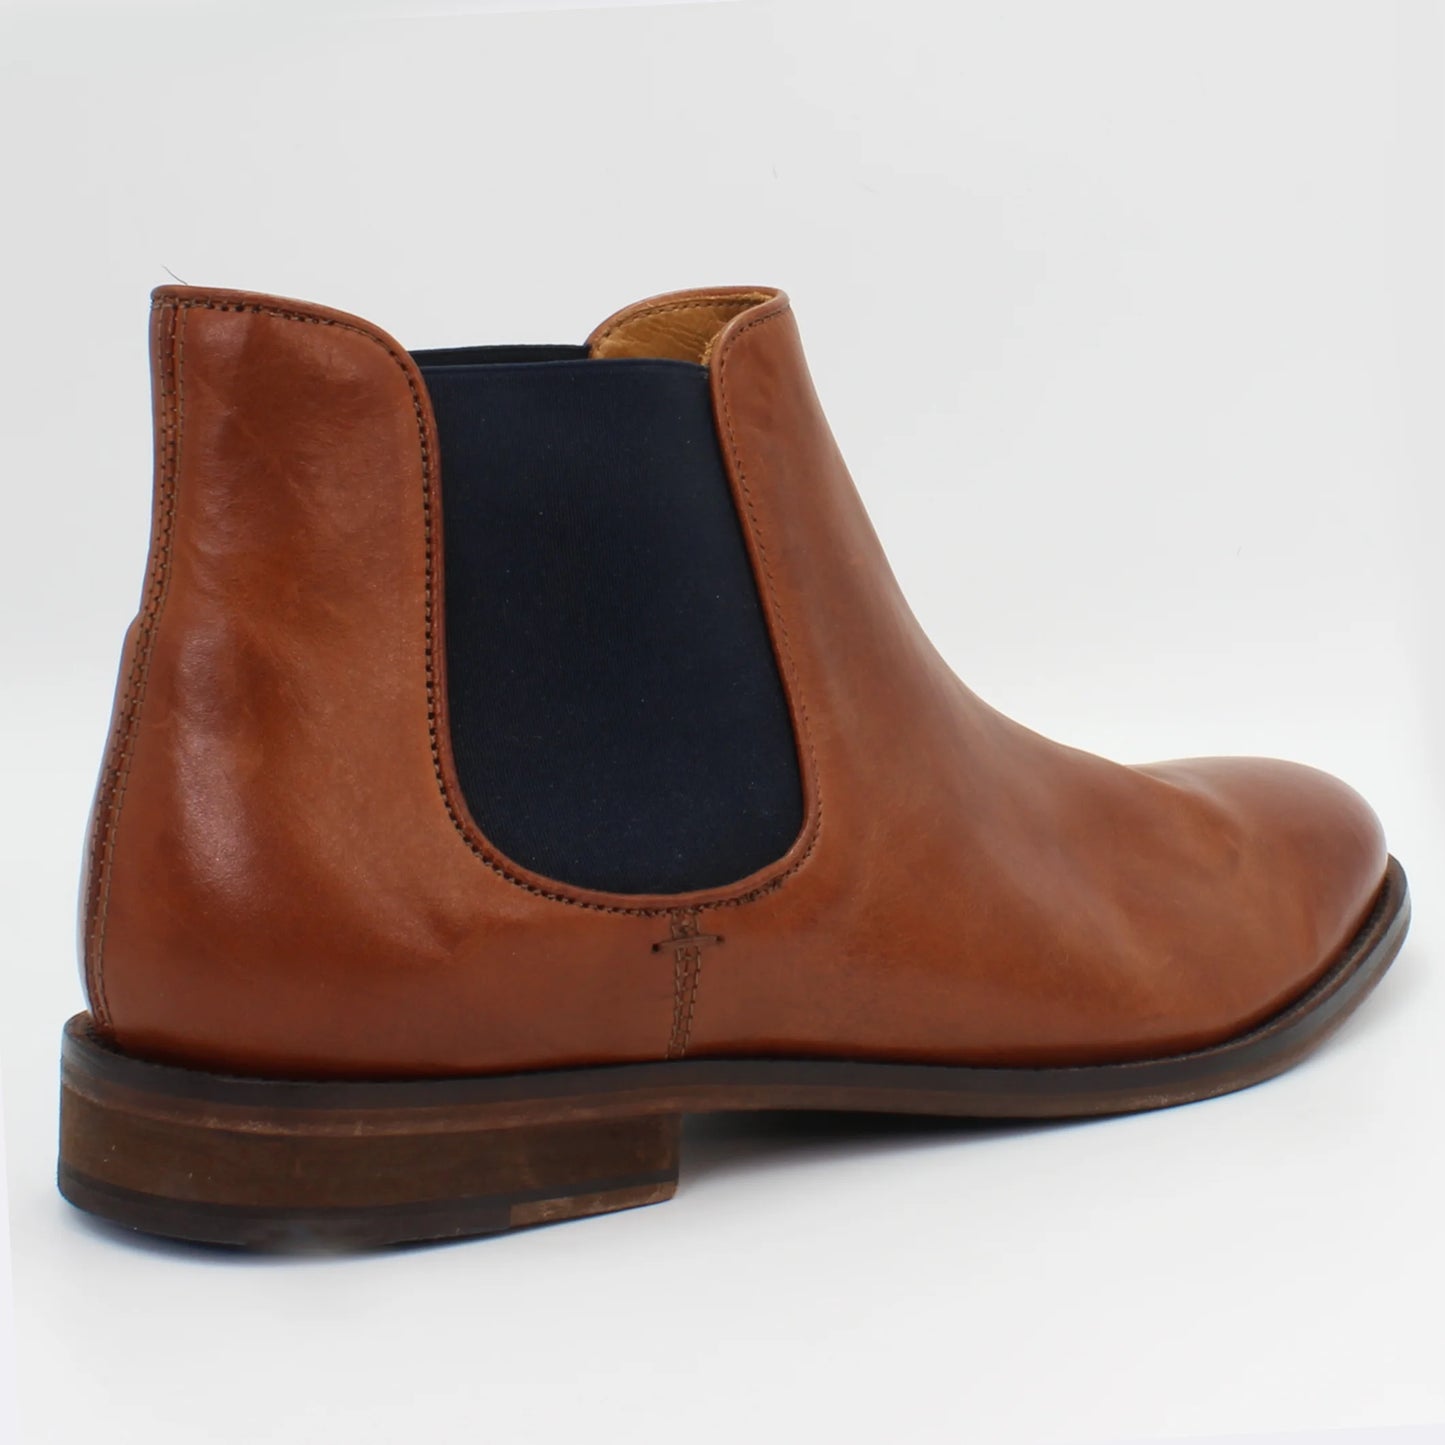 Men's Chelsea Boot. Genuine calf leather upper and leather sole. Made in Italy.